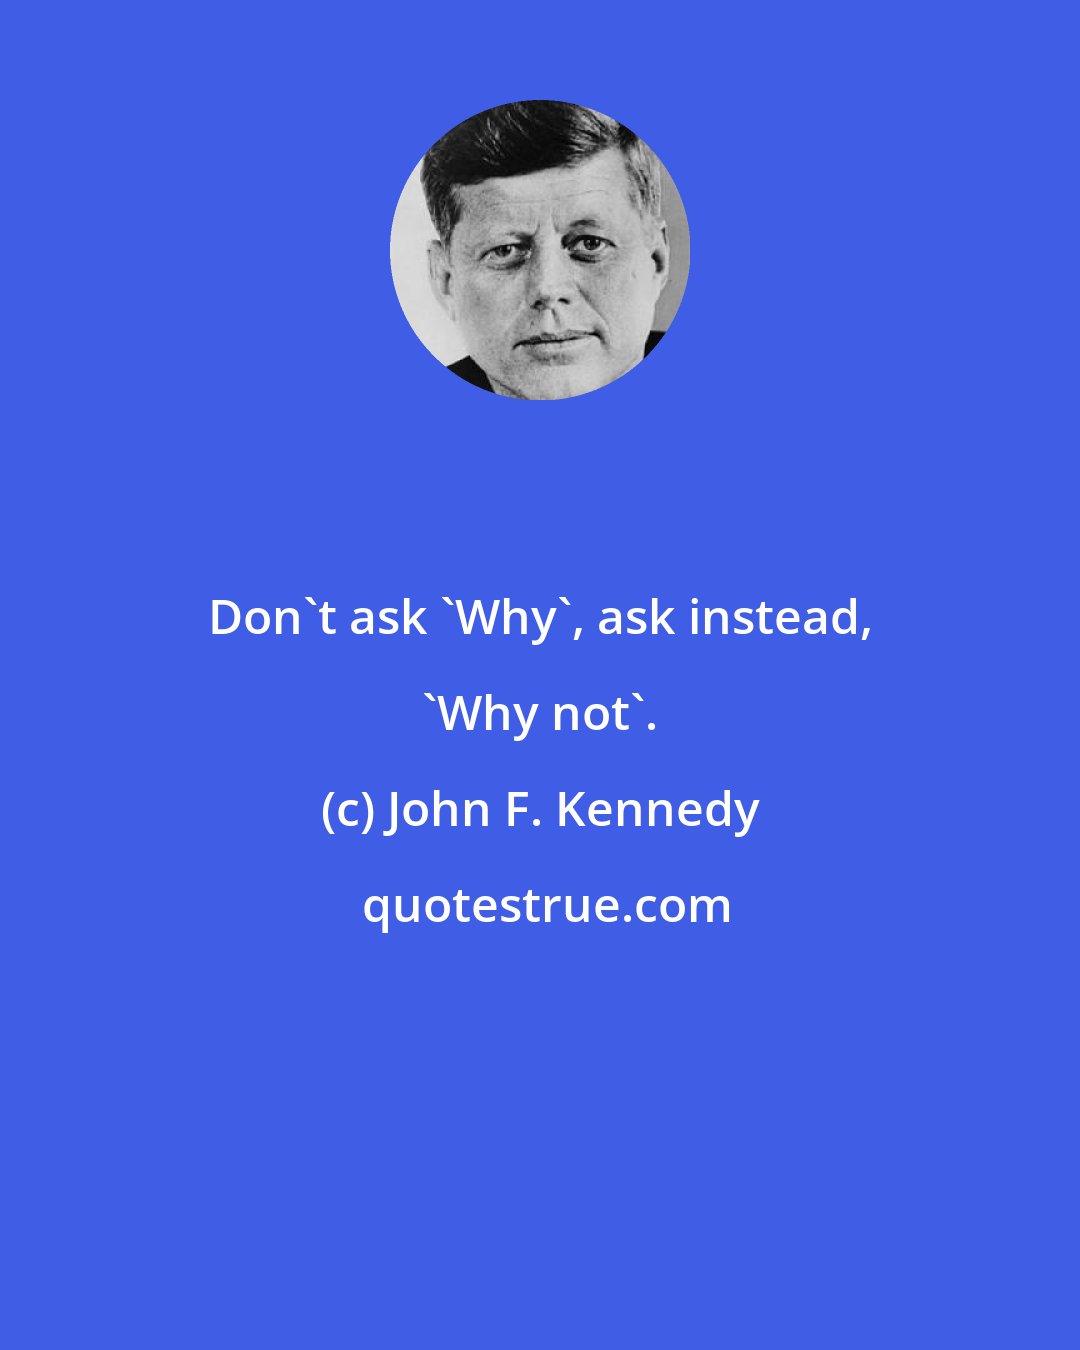 John F. Kennedy: Don't ask 'Why', ask instead, 'Why not'.